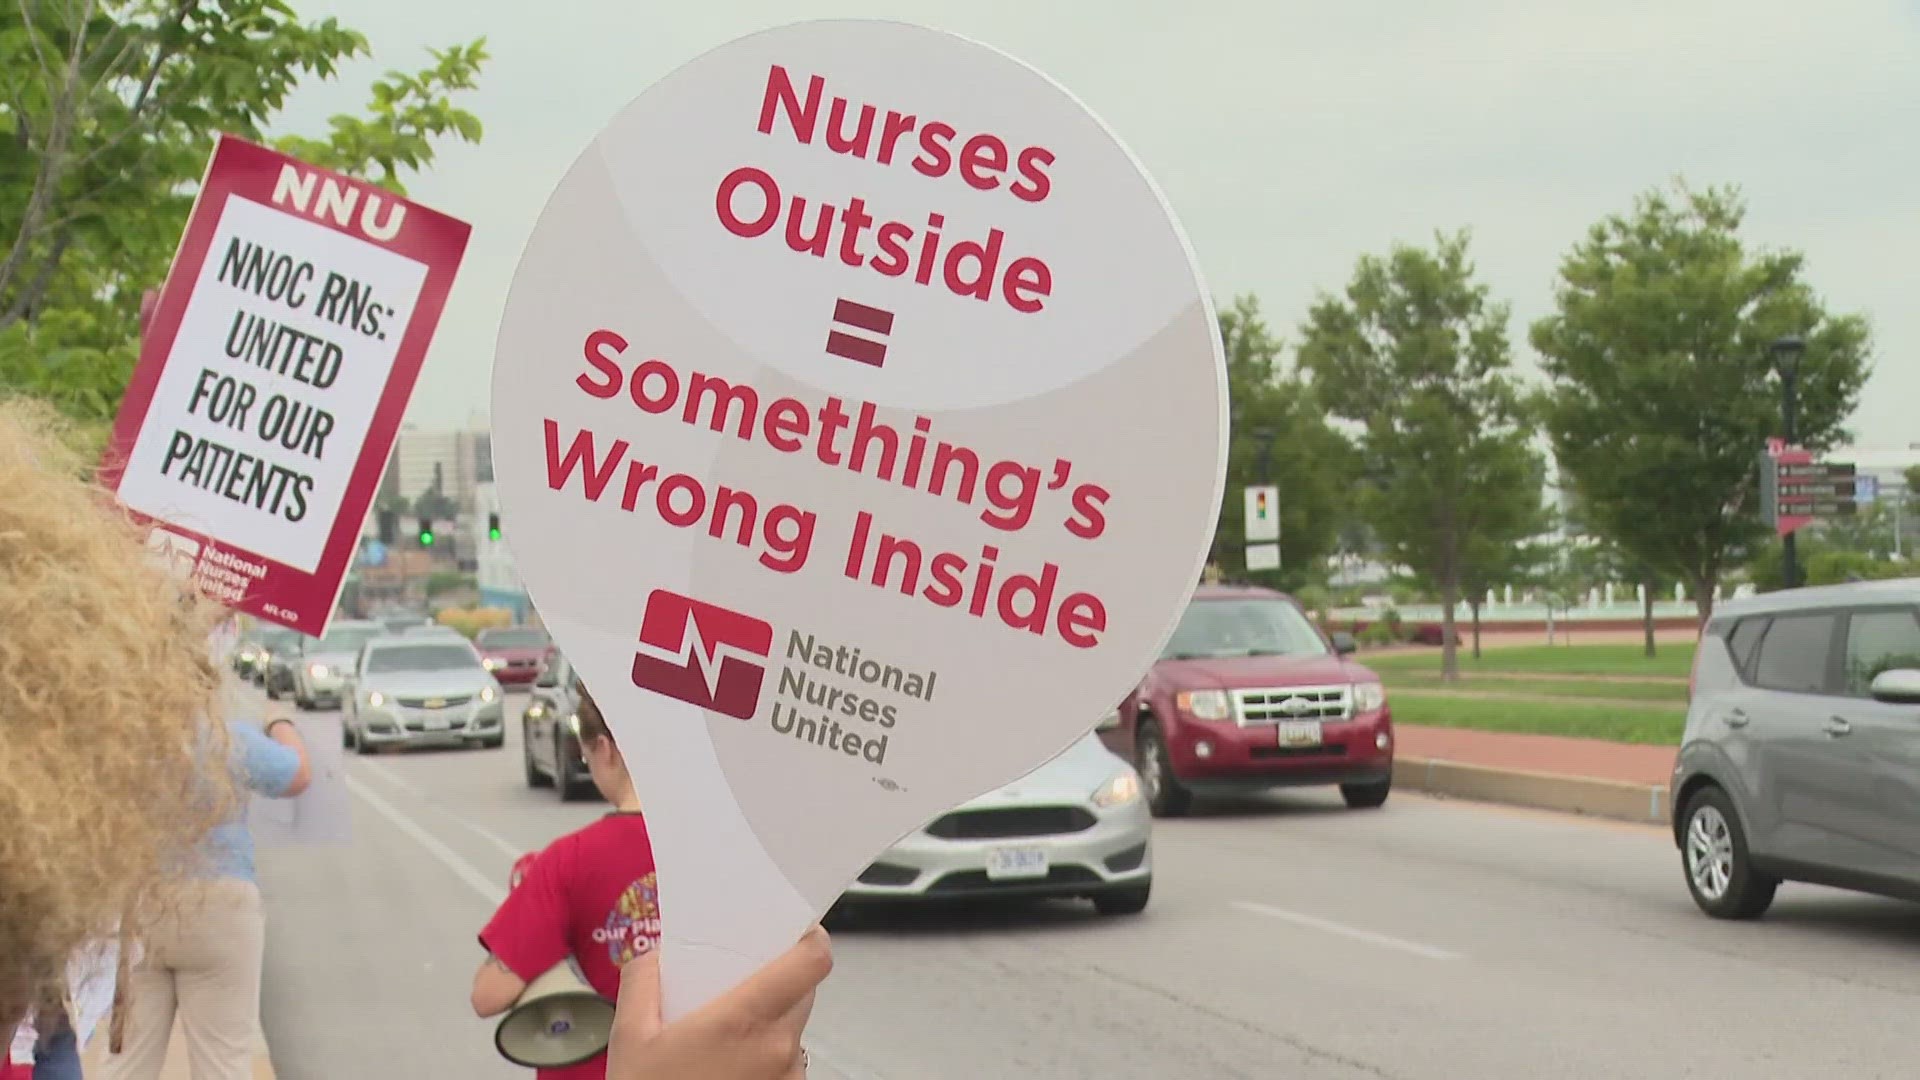 Nurses say they are currently working without a contract. But, they're in negotiations to bring about changes that they say will help keep patients safe.